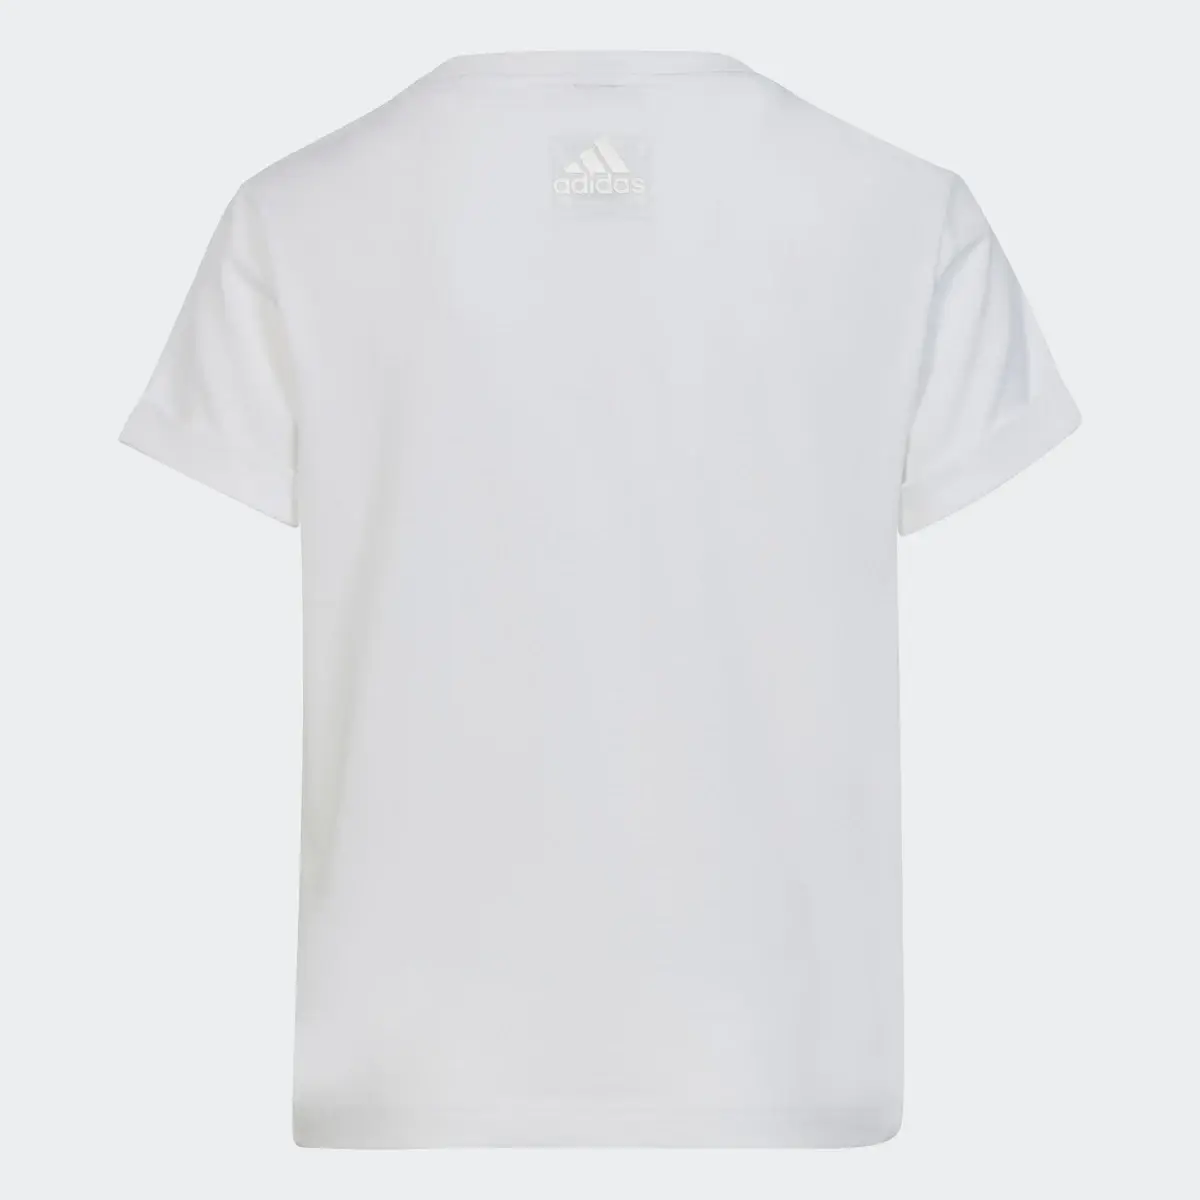 Adidas Dance Knotted T-Shirt. 2